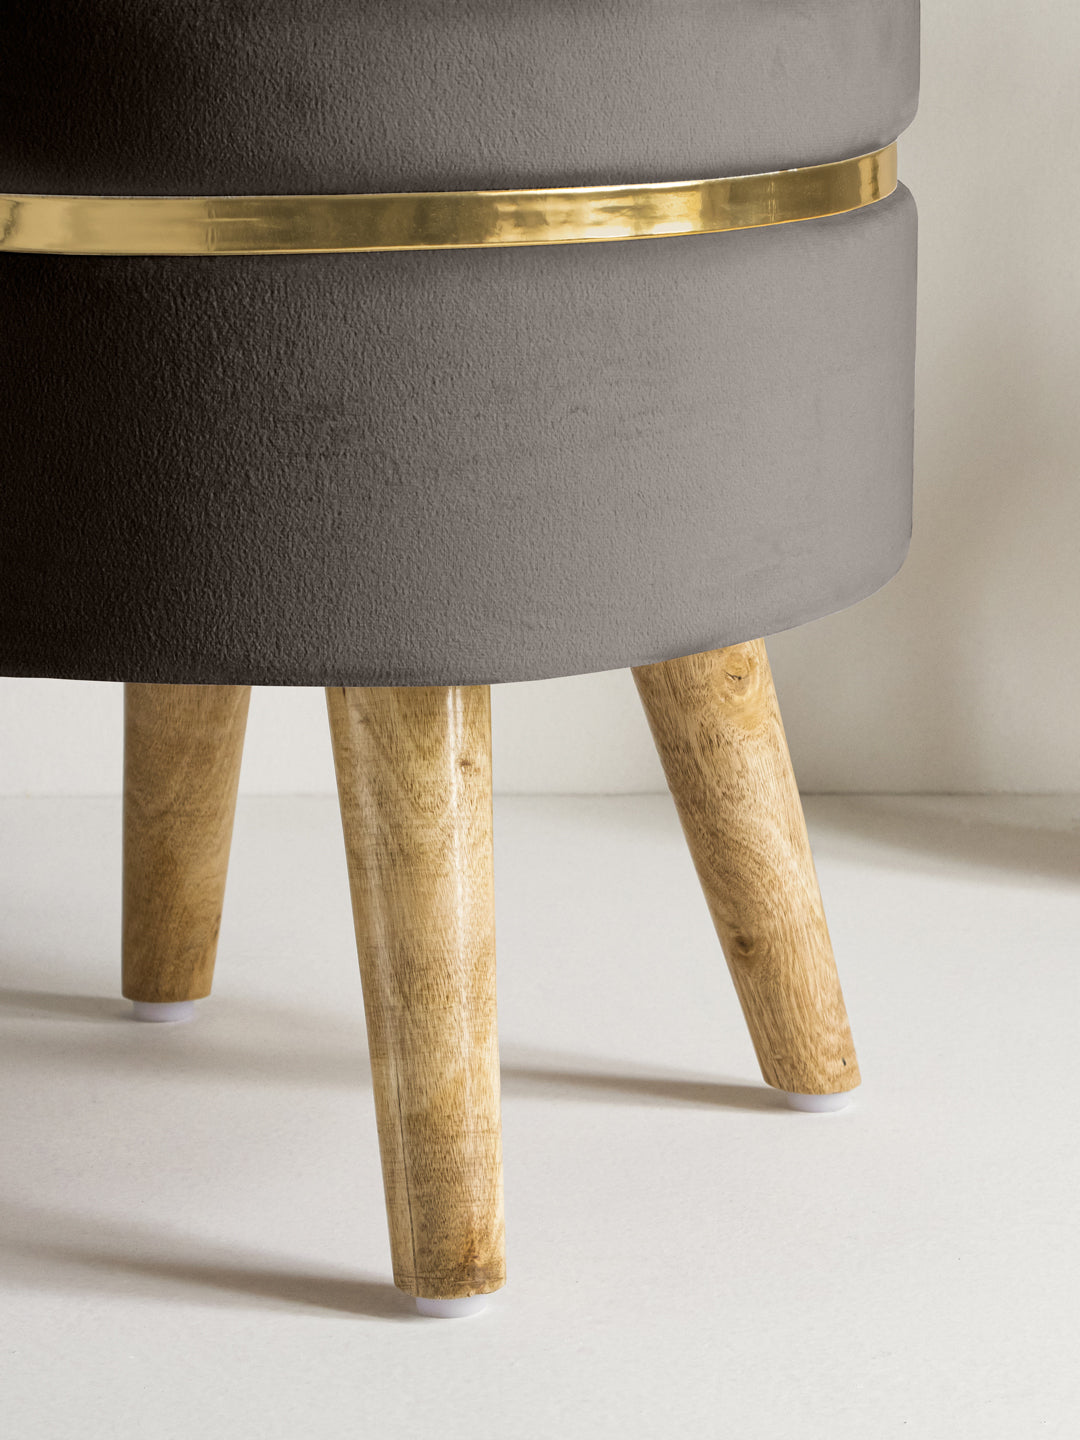 Fossil Grey Stool With Golden Ring & Wood Legs